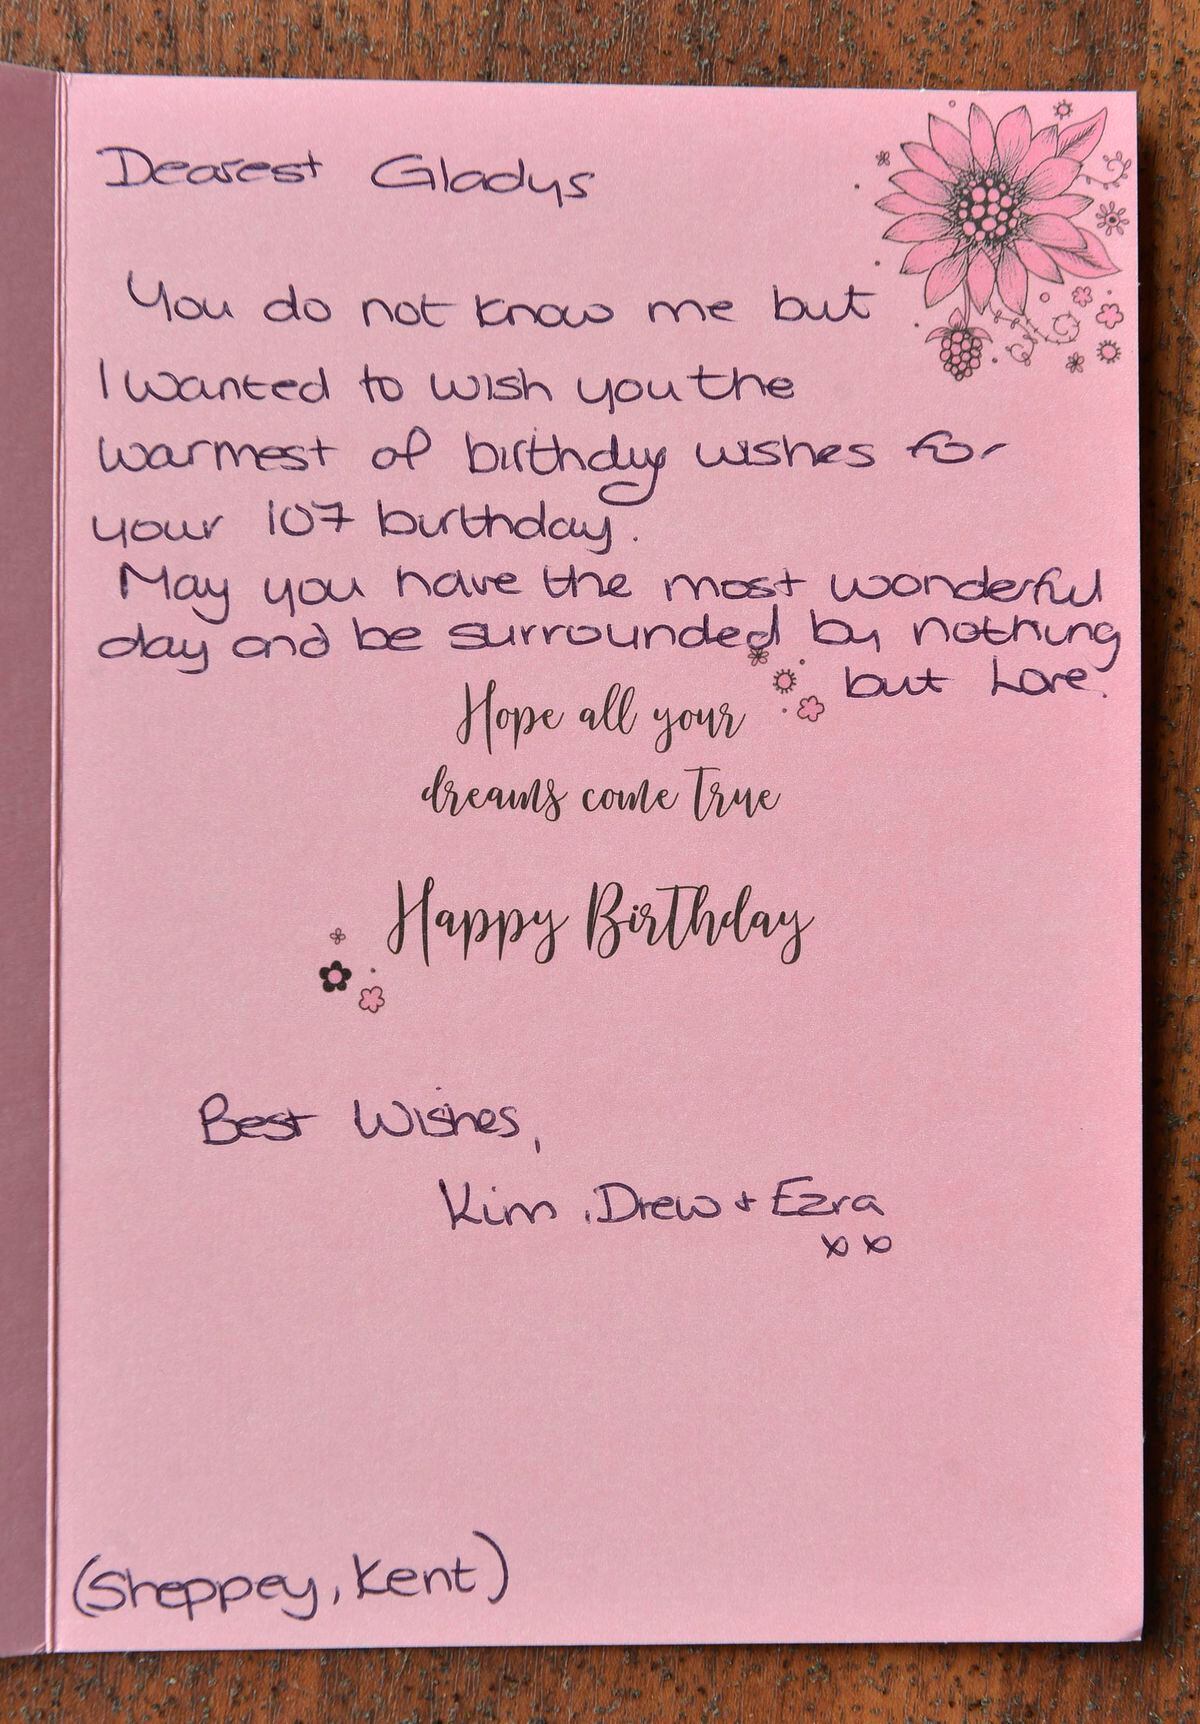 Another card from well-wishers, this time in Sheppey, Kent